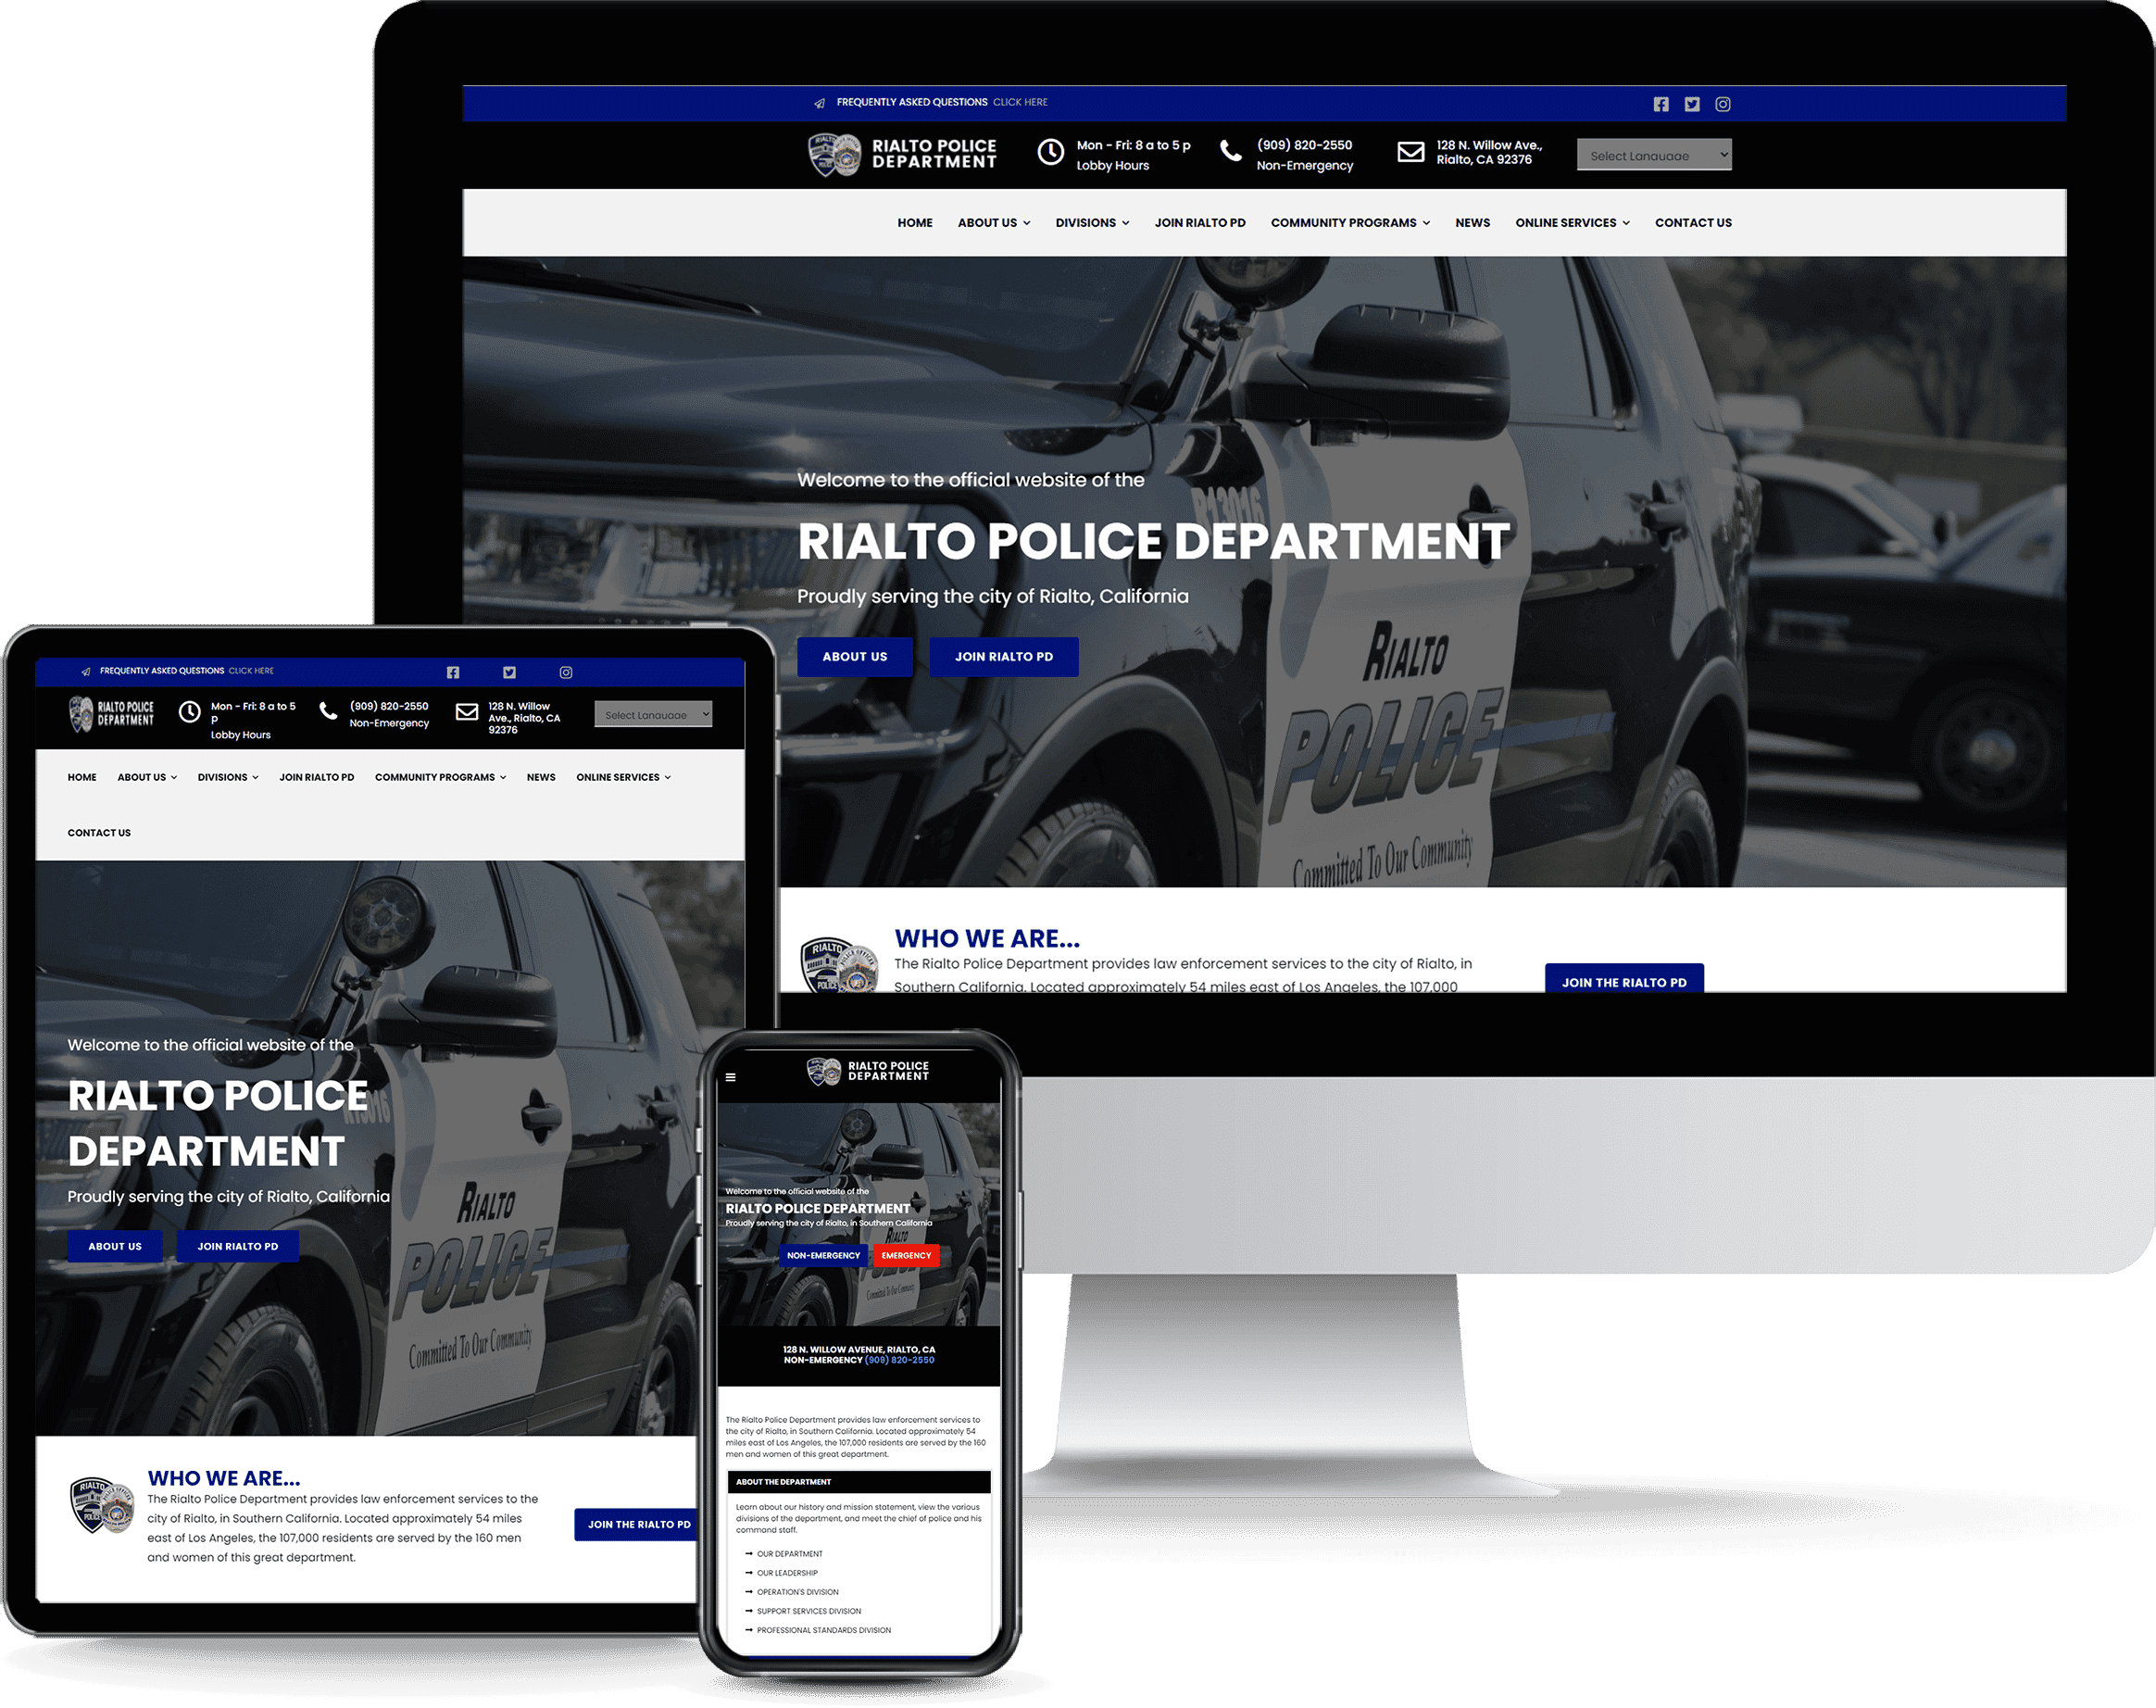 Rialto Police website design displayed on iPhone, iPad, and Mac computer